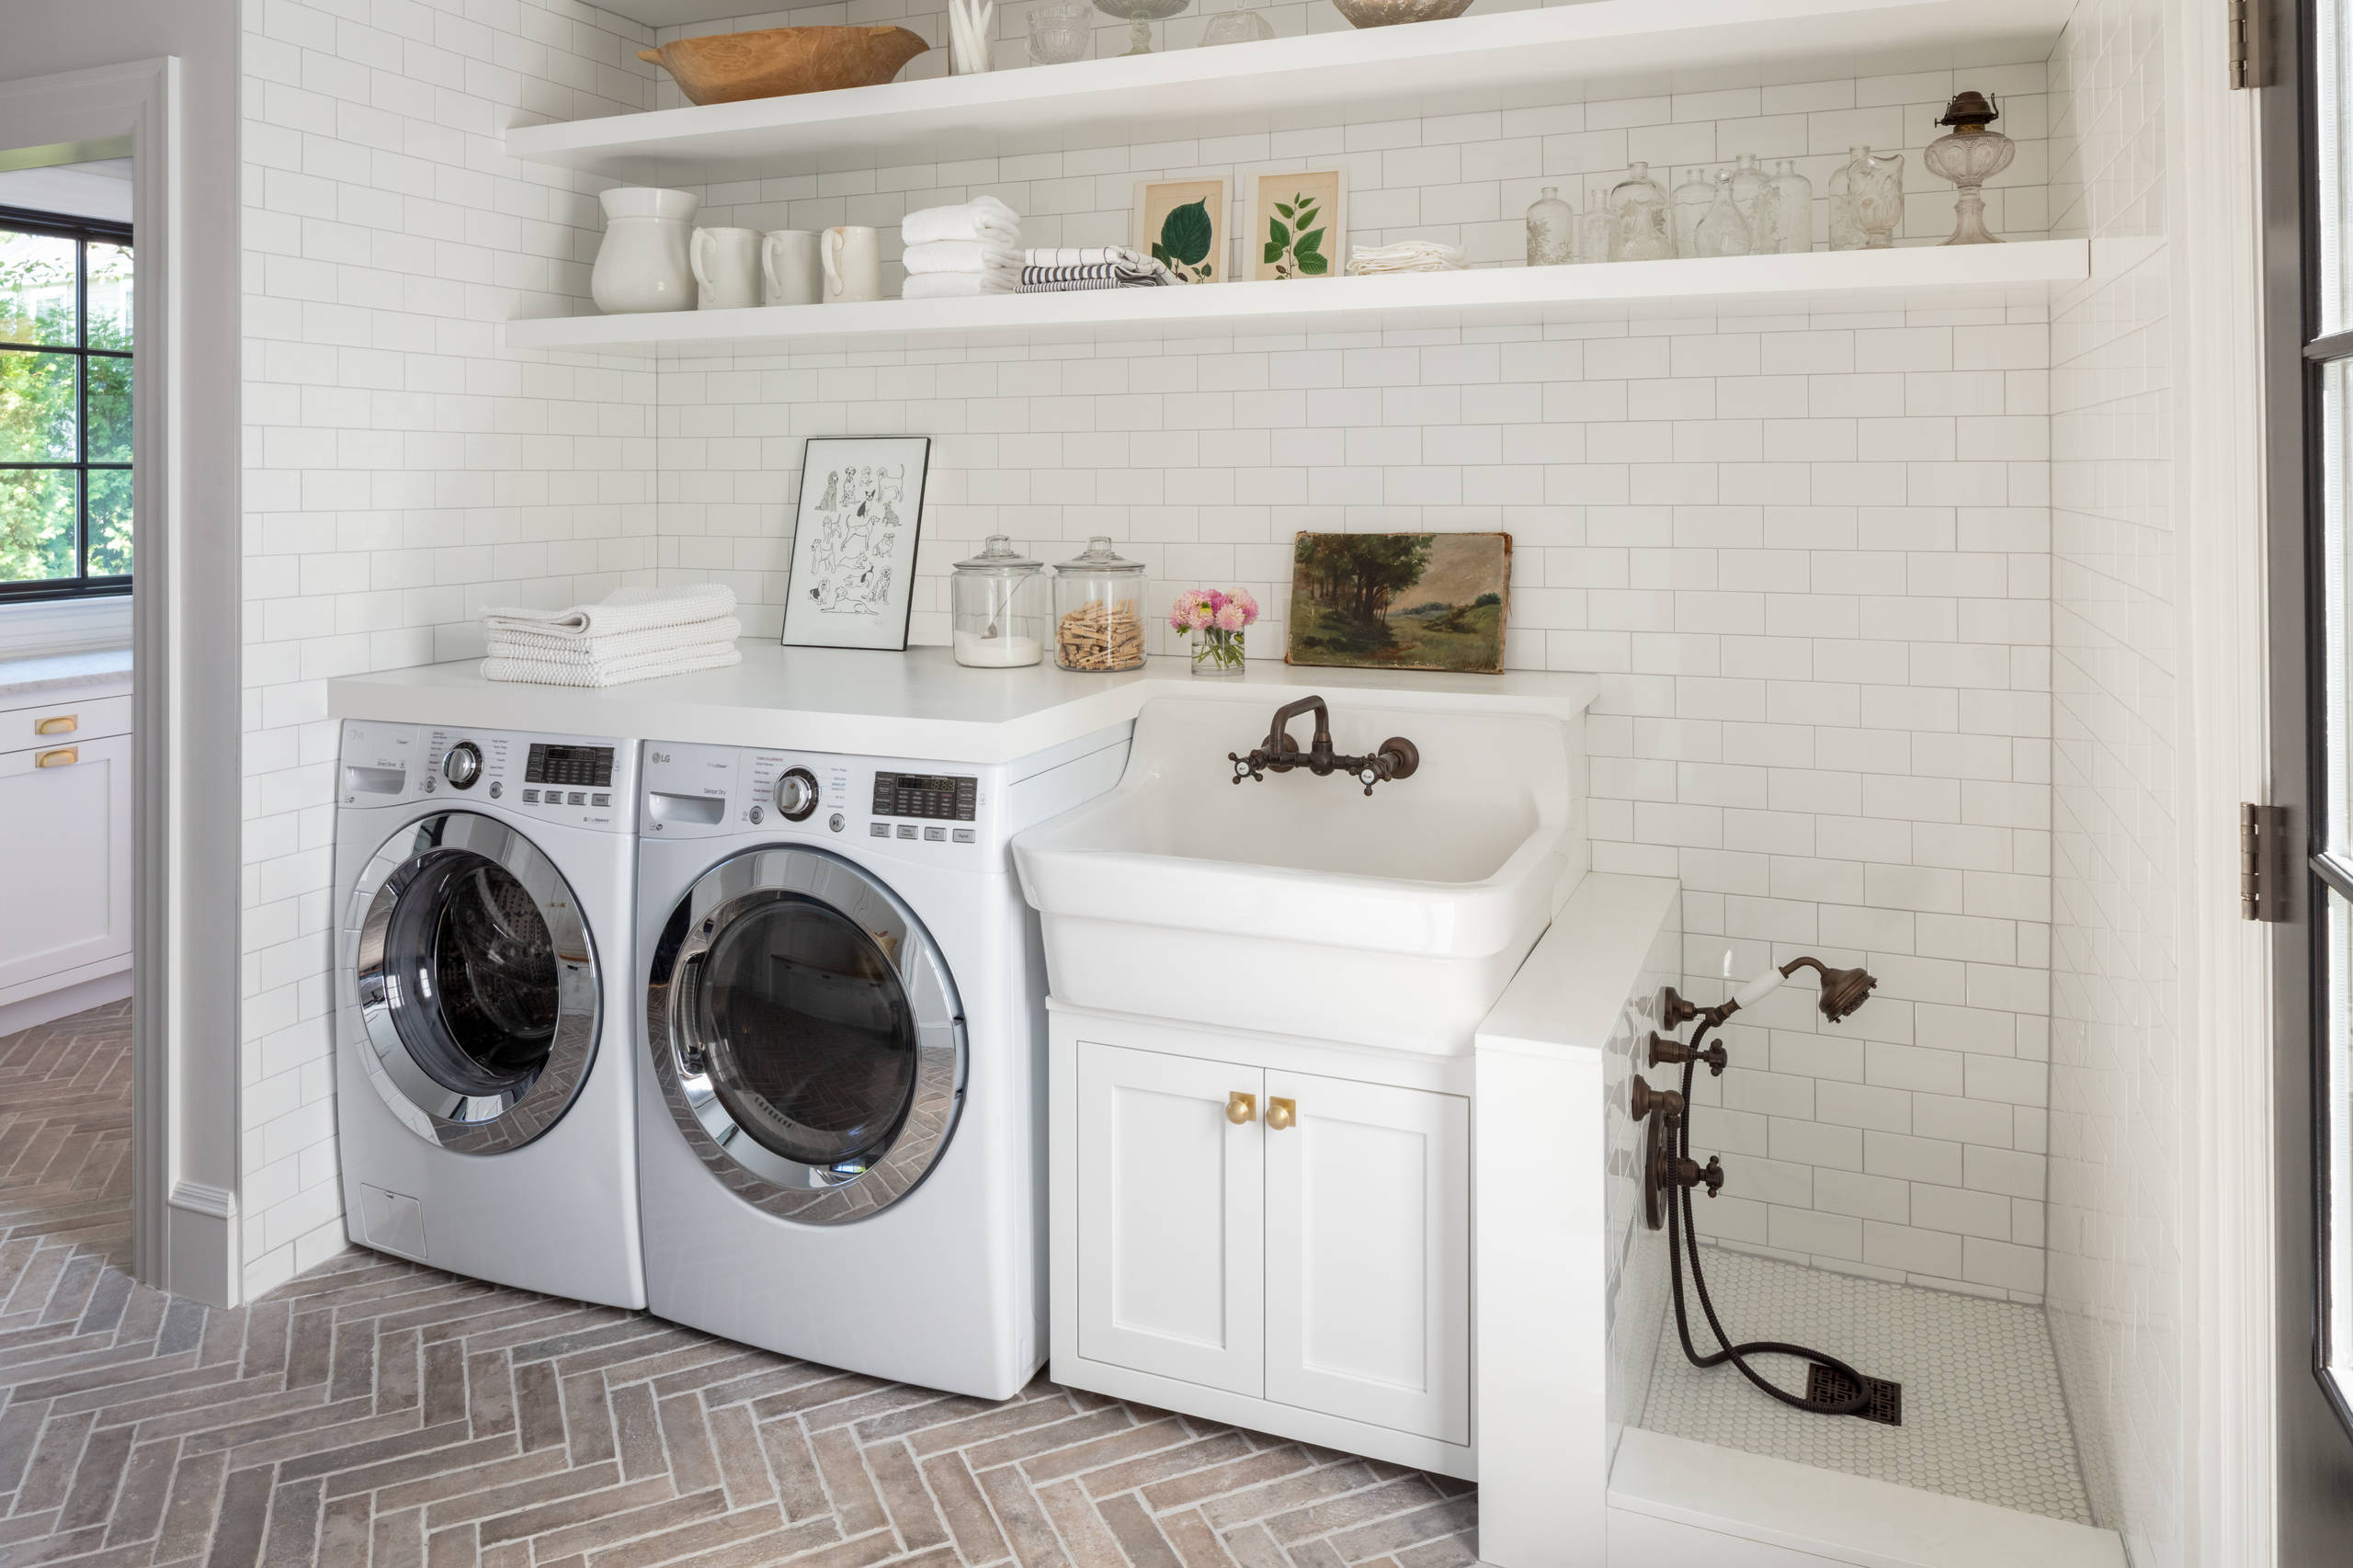 using a kitchen sink in the laundry room